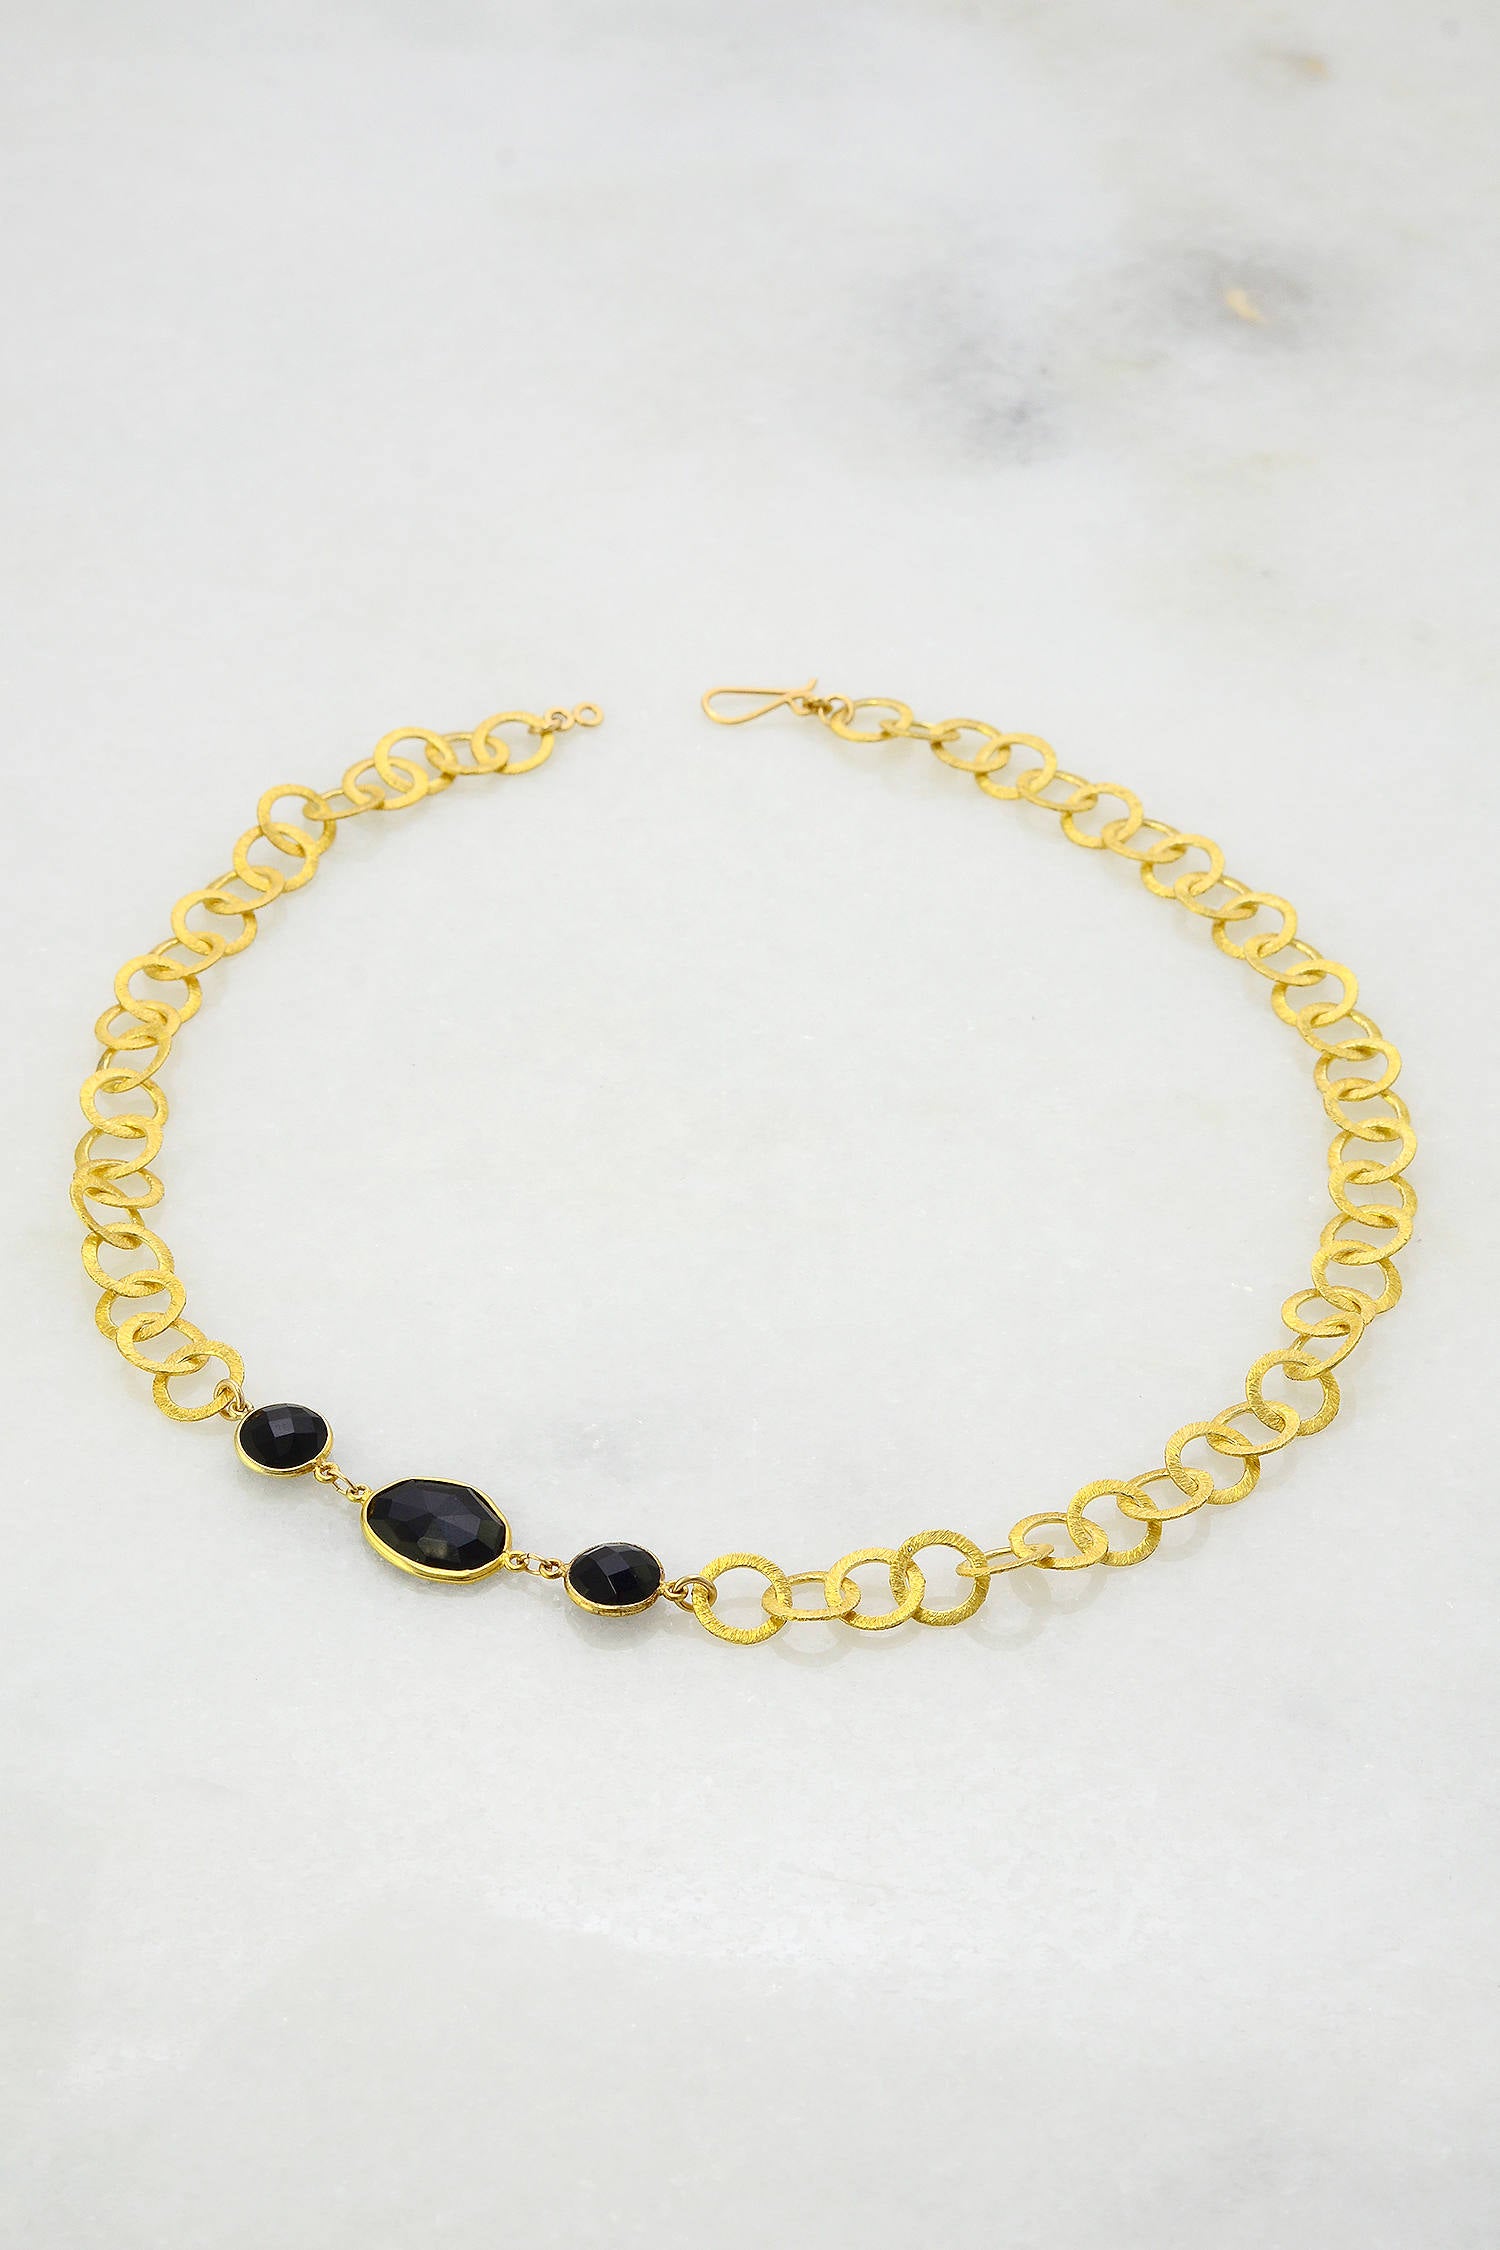 18 Inch Black Onyx Hydro Choker Necklace Faceted Rondelle Beads 24k Gold  Plated Wire Wrapped Rosary Vermeil Chain.